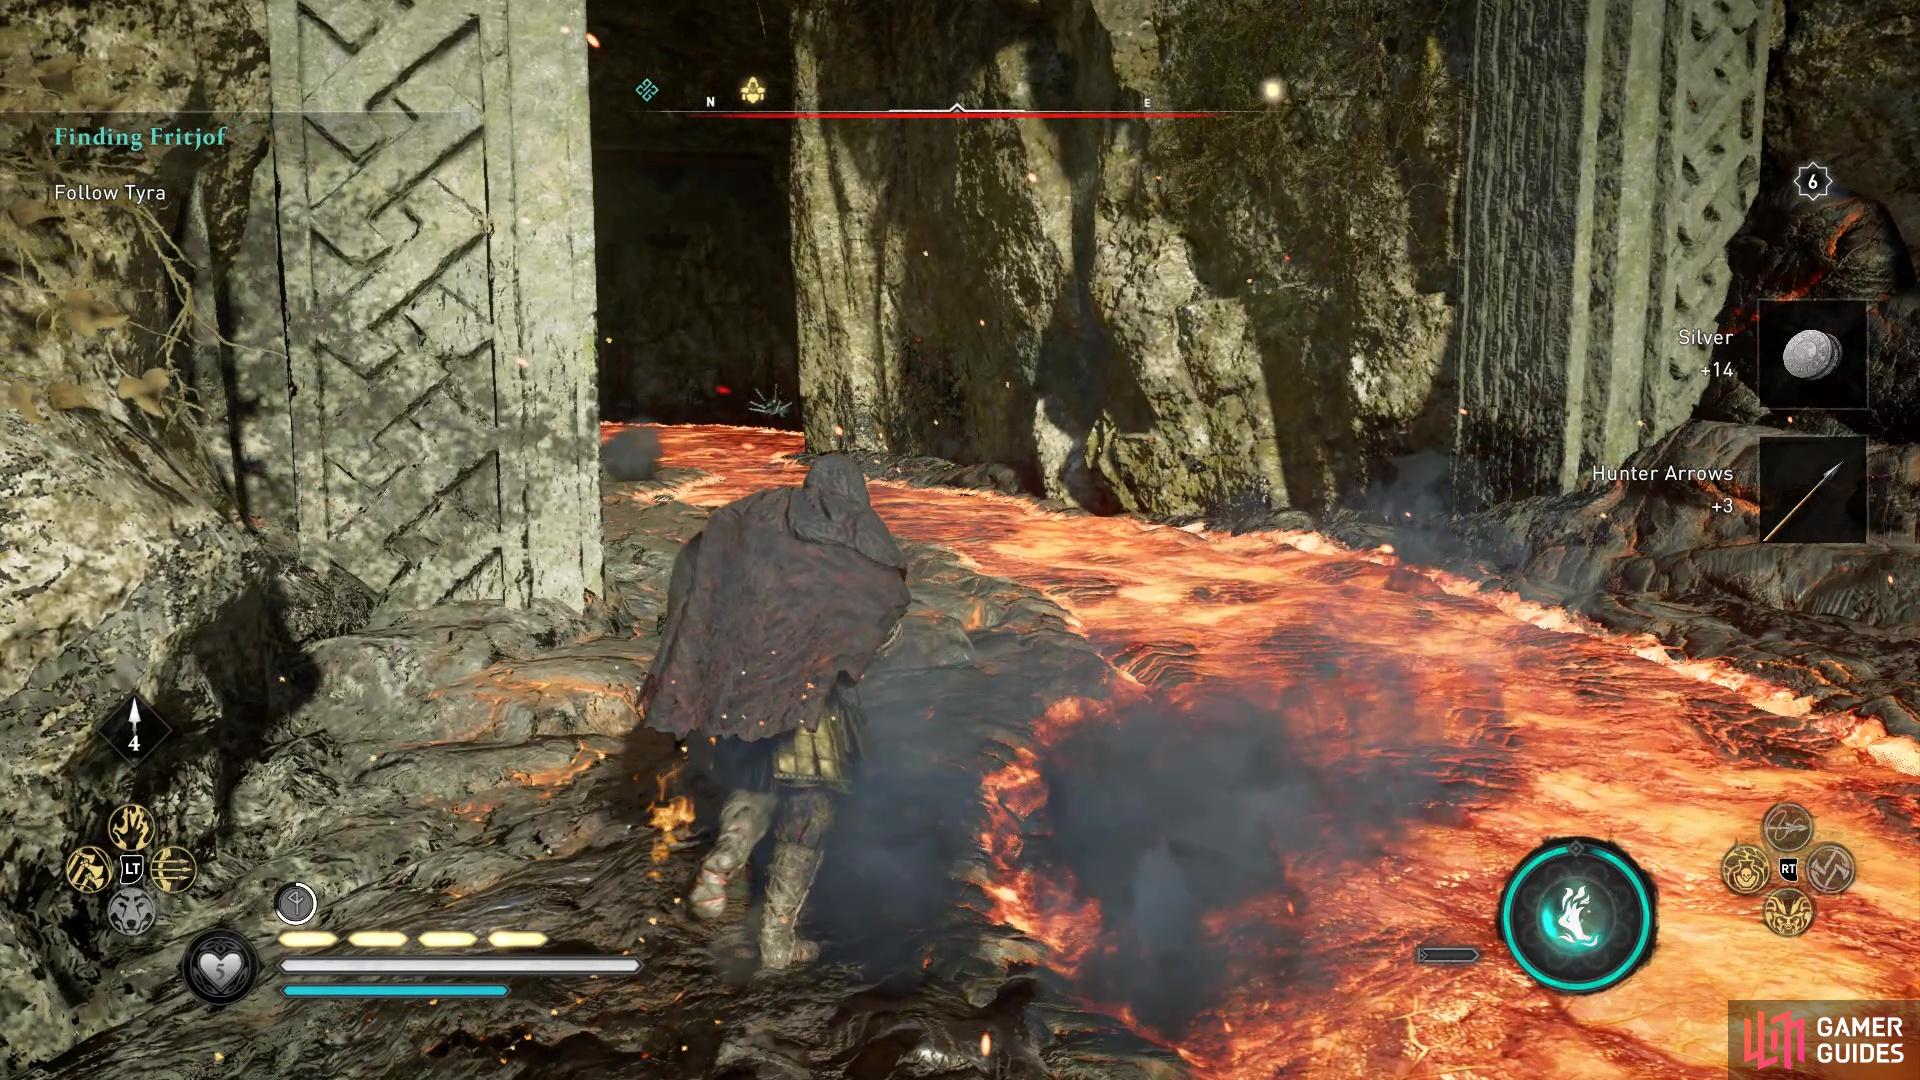 you'll need to use the Power of Muspelheim to traverse into the lava cave.